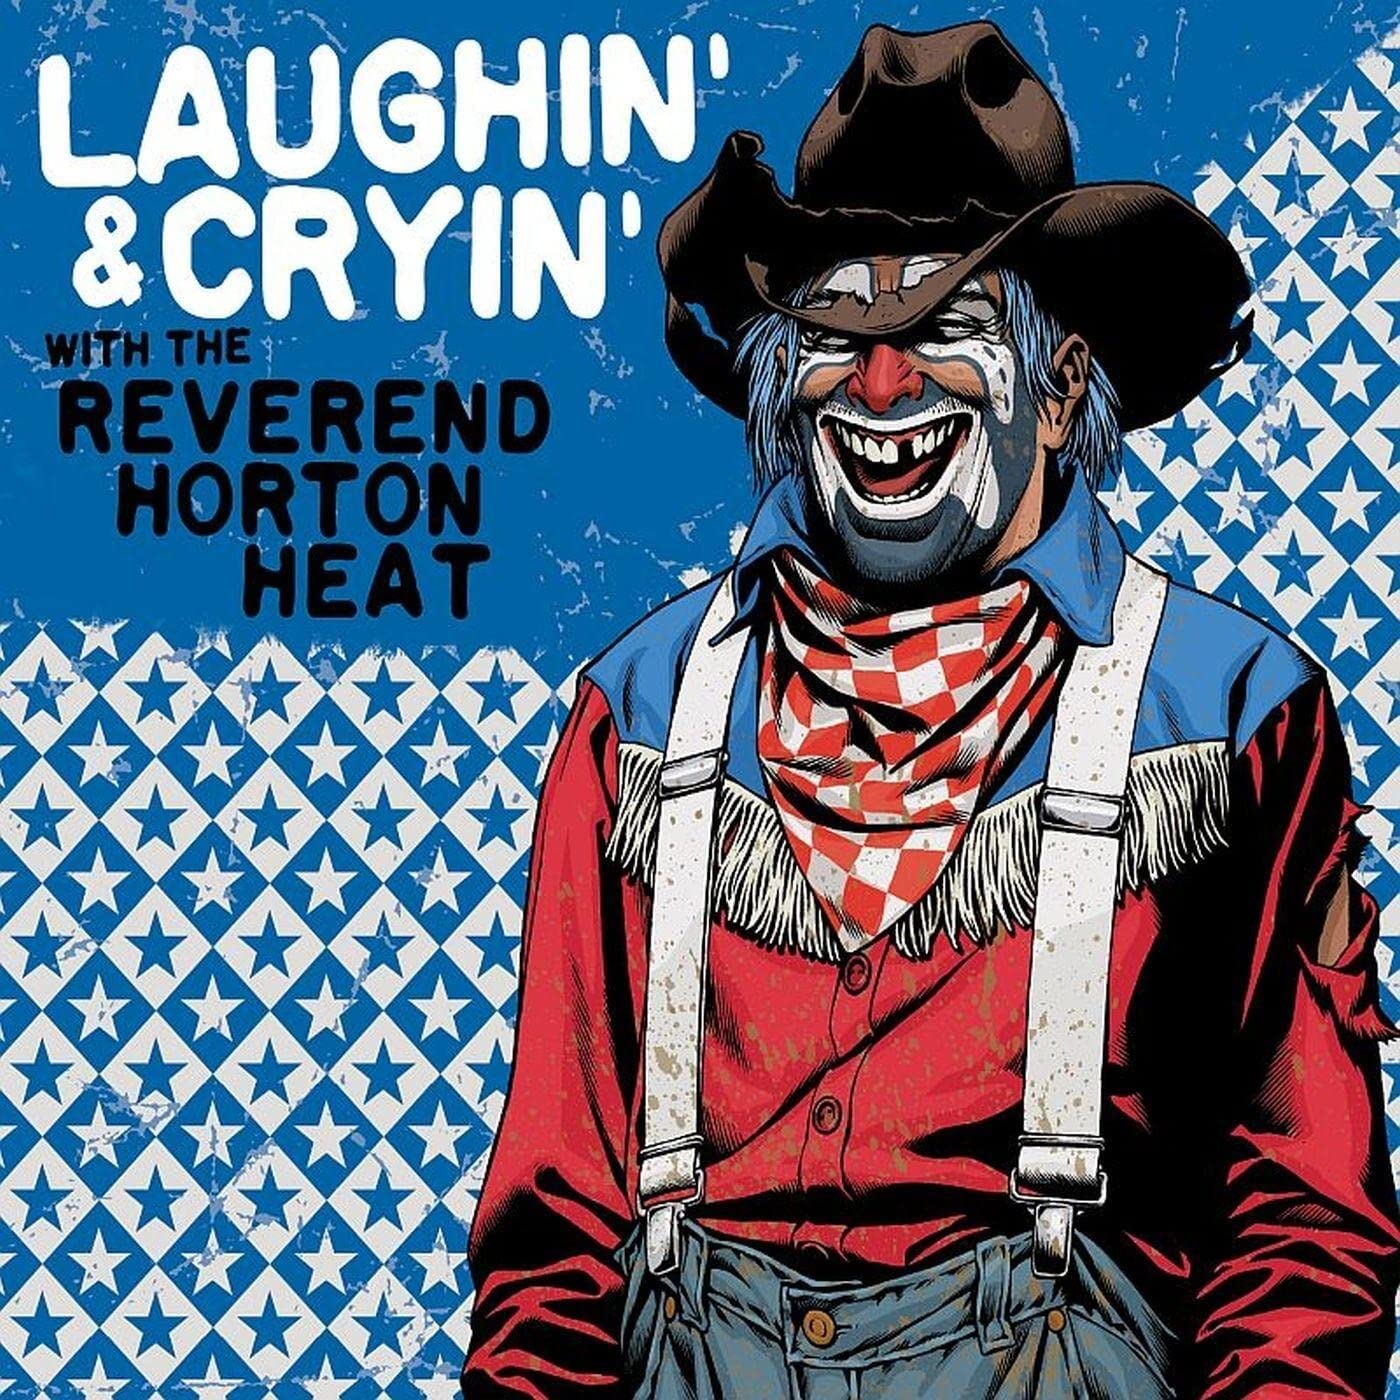 Laughin’ & Cryin’ with The Reverend Horton Heat (Transparent Red Vinyl)